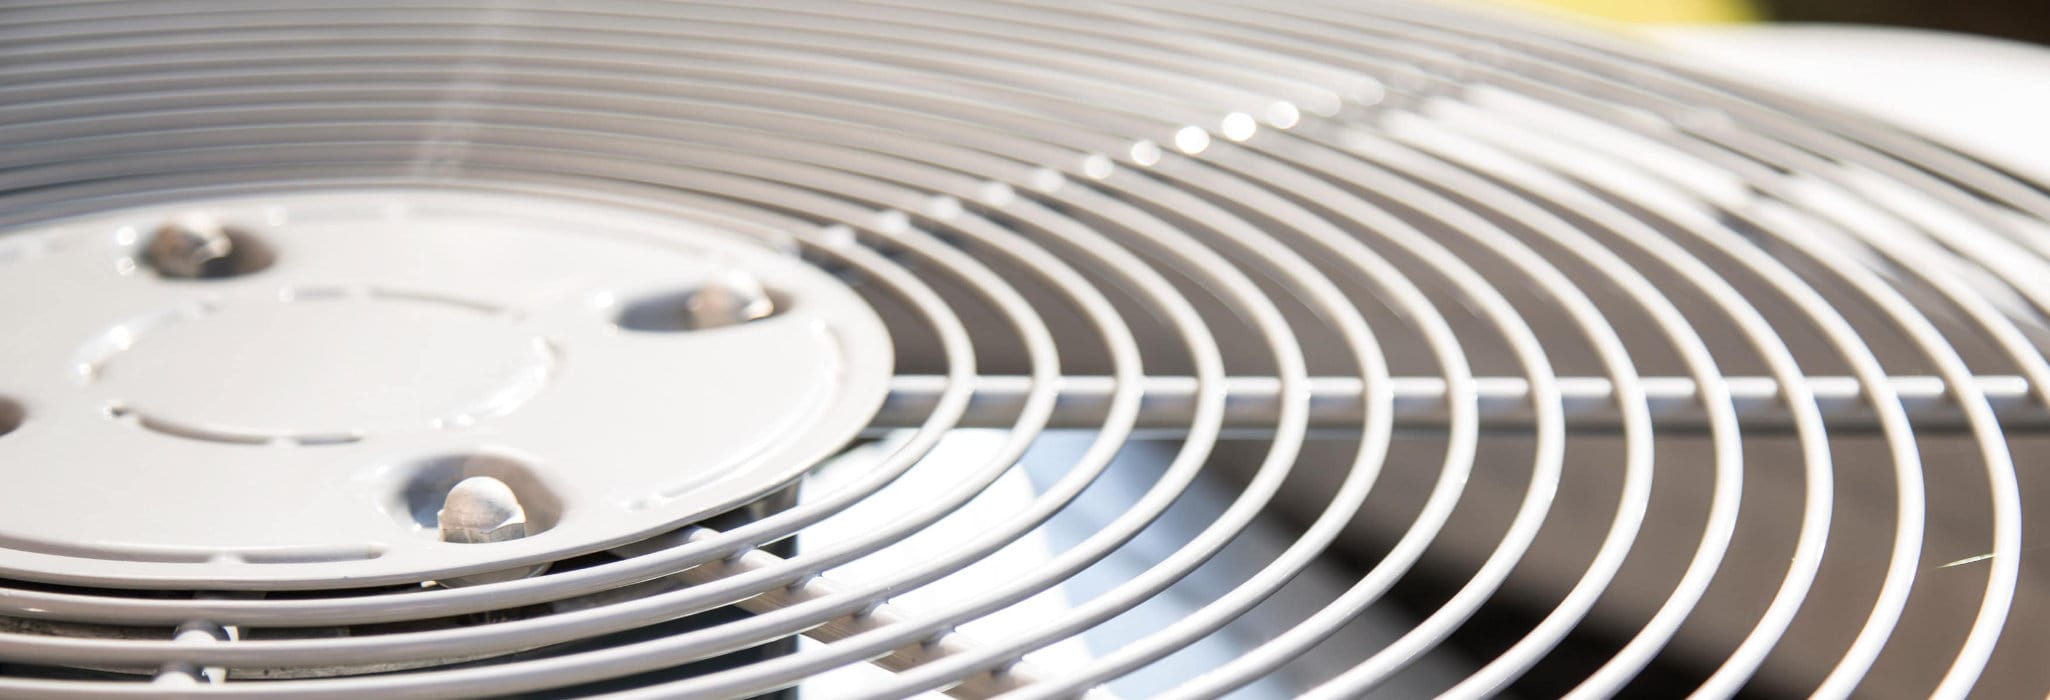 Air Conditioning System Service, Installation, Repair & Maintenance in New Orleans, LA.